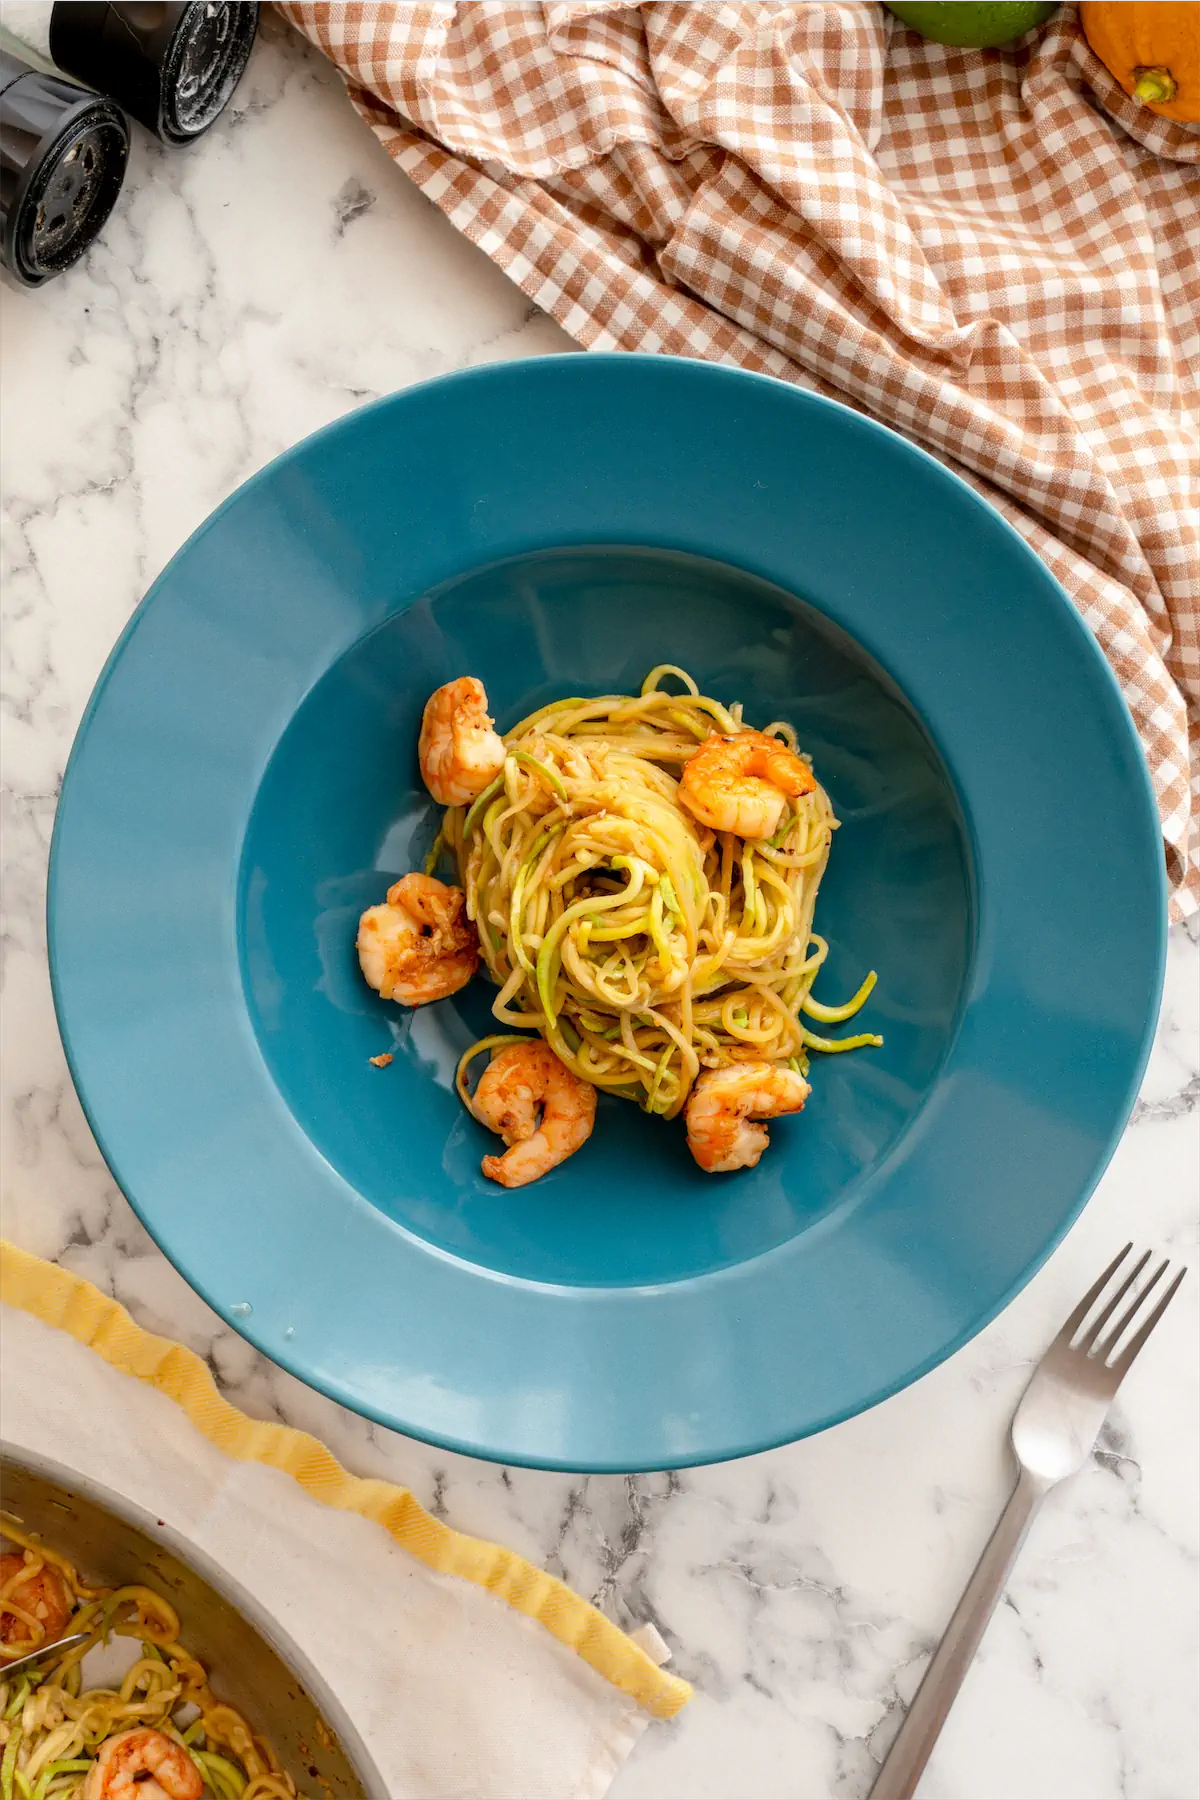 Low-carb zucchini noodles served on a pasta bowl and fork on a table.